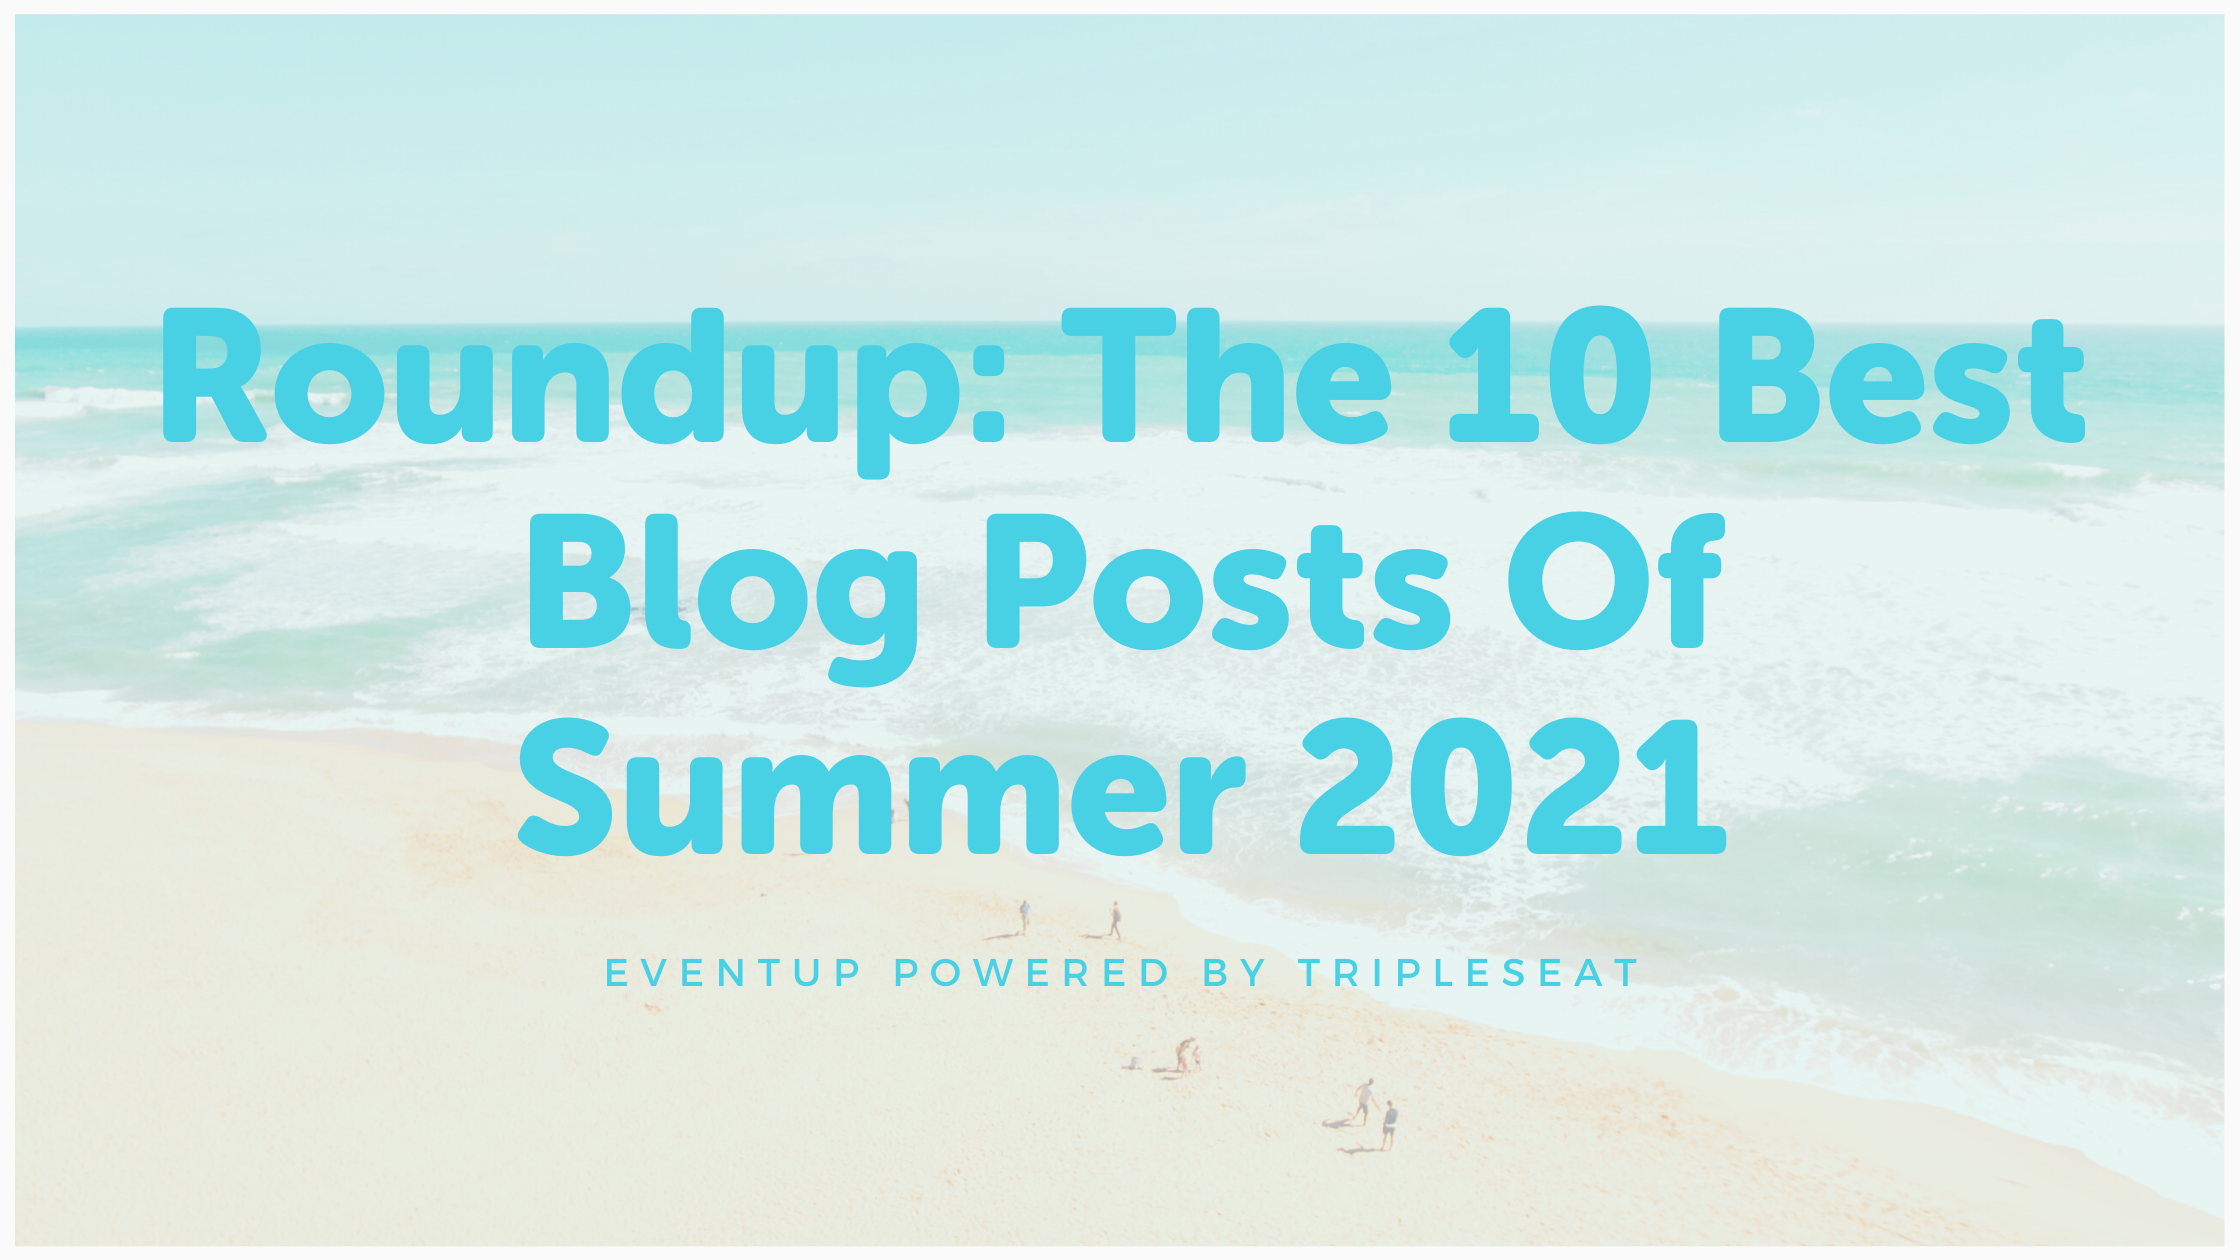 Roundup: The 10 Best Blog Posts Of Summer 2021